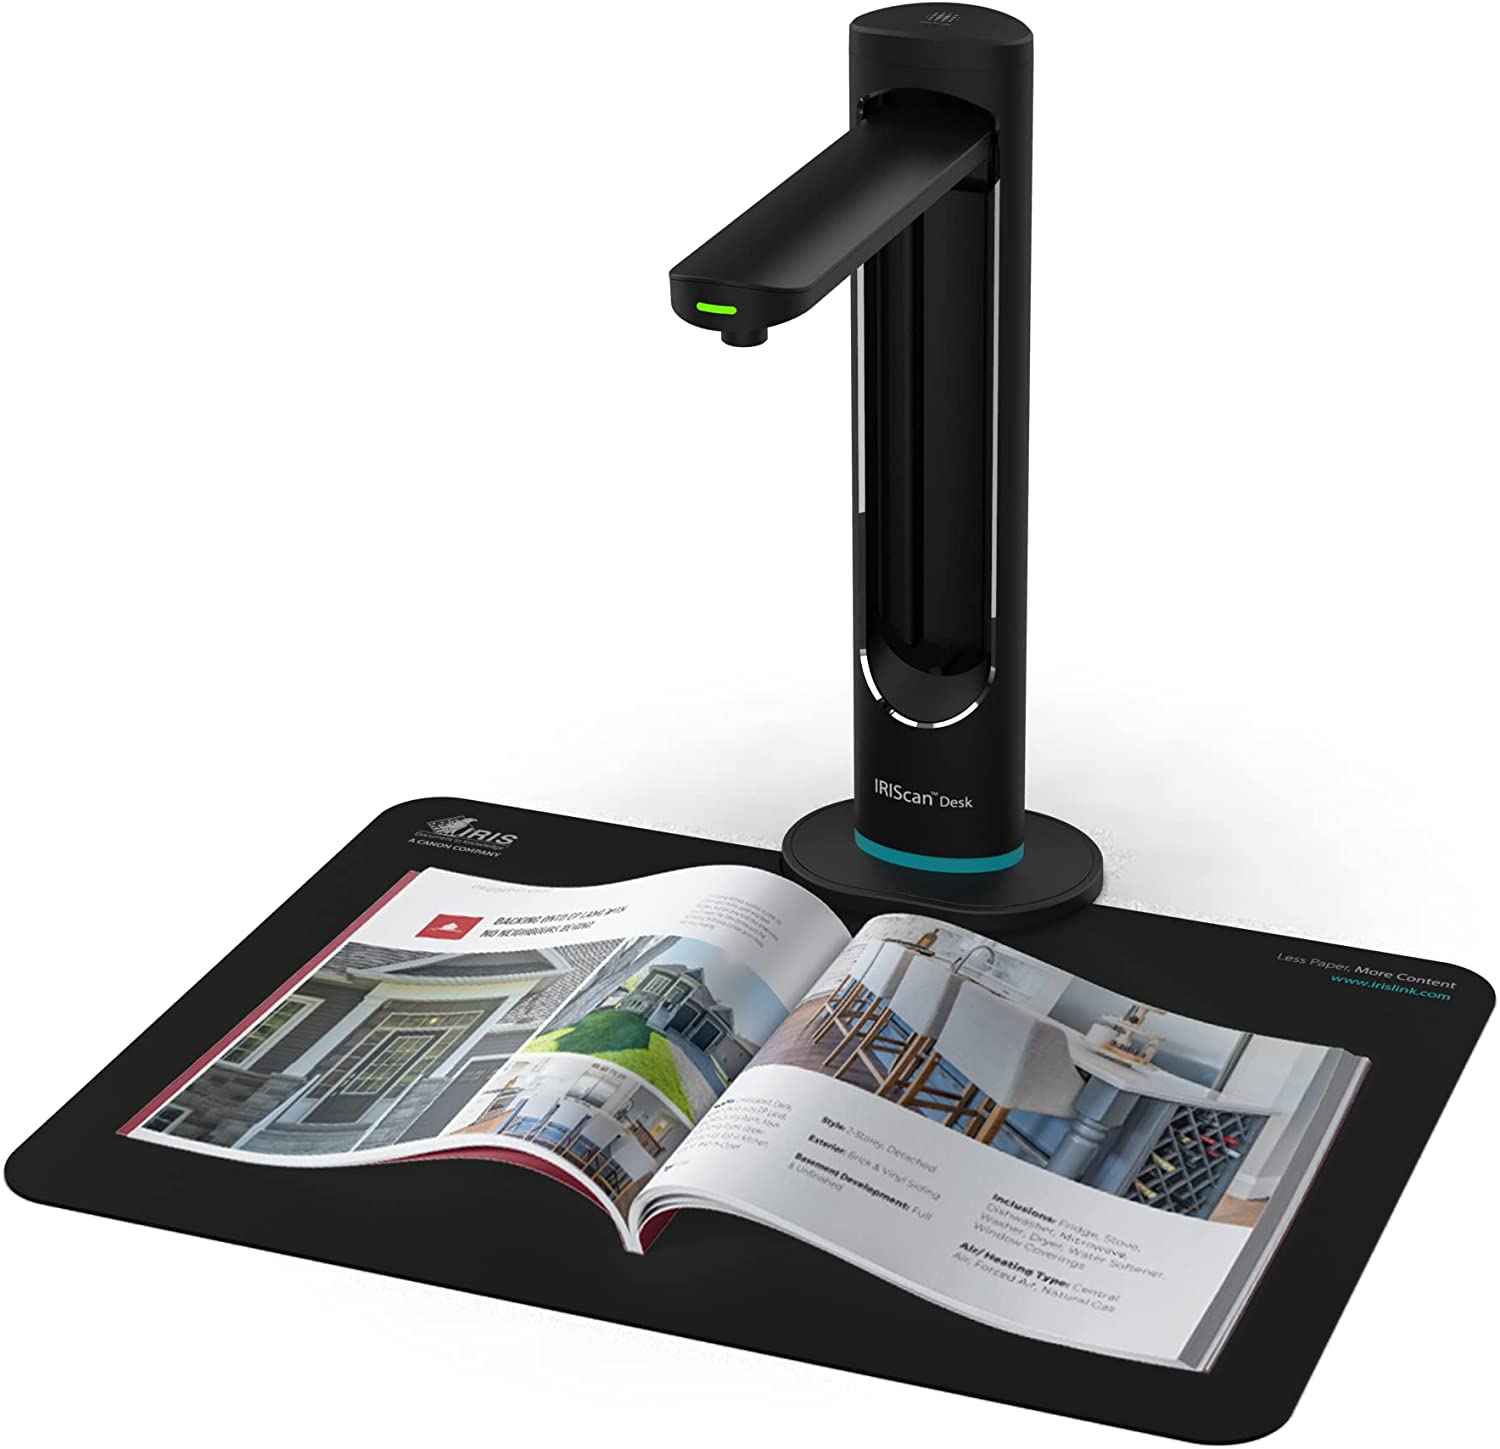 Review of the IRIScan Desk 6 Business Scanner